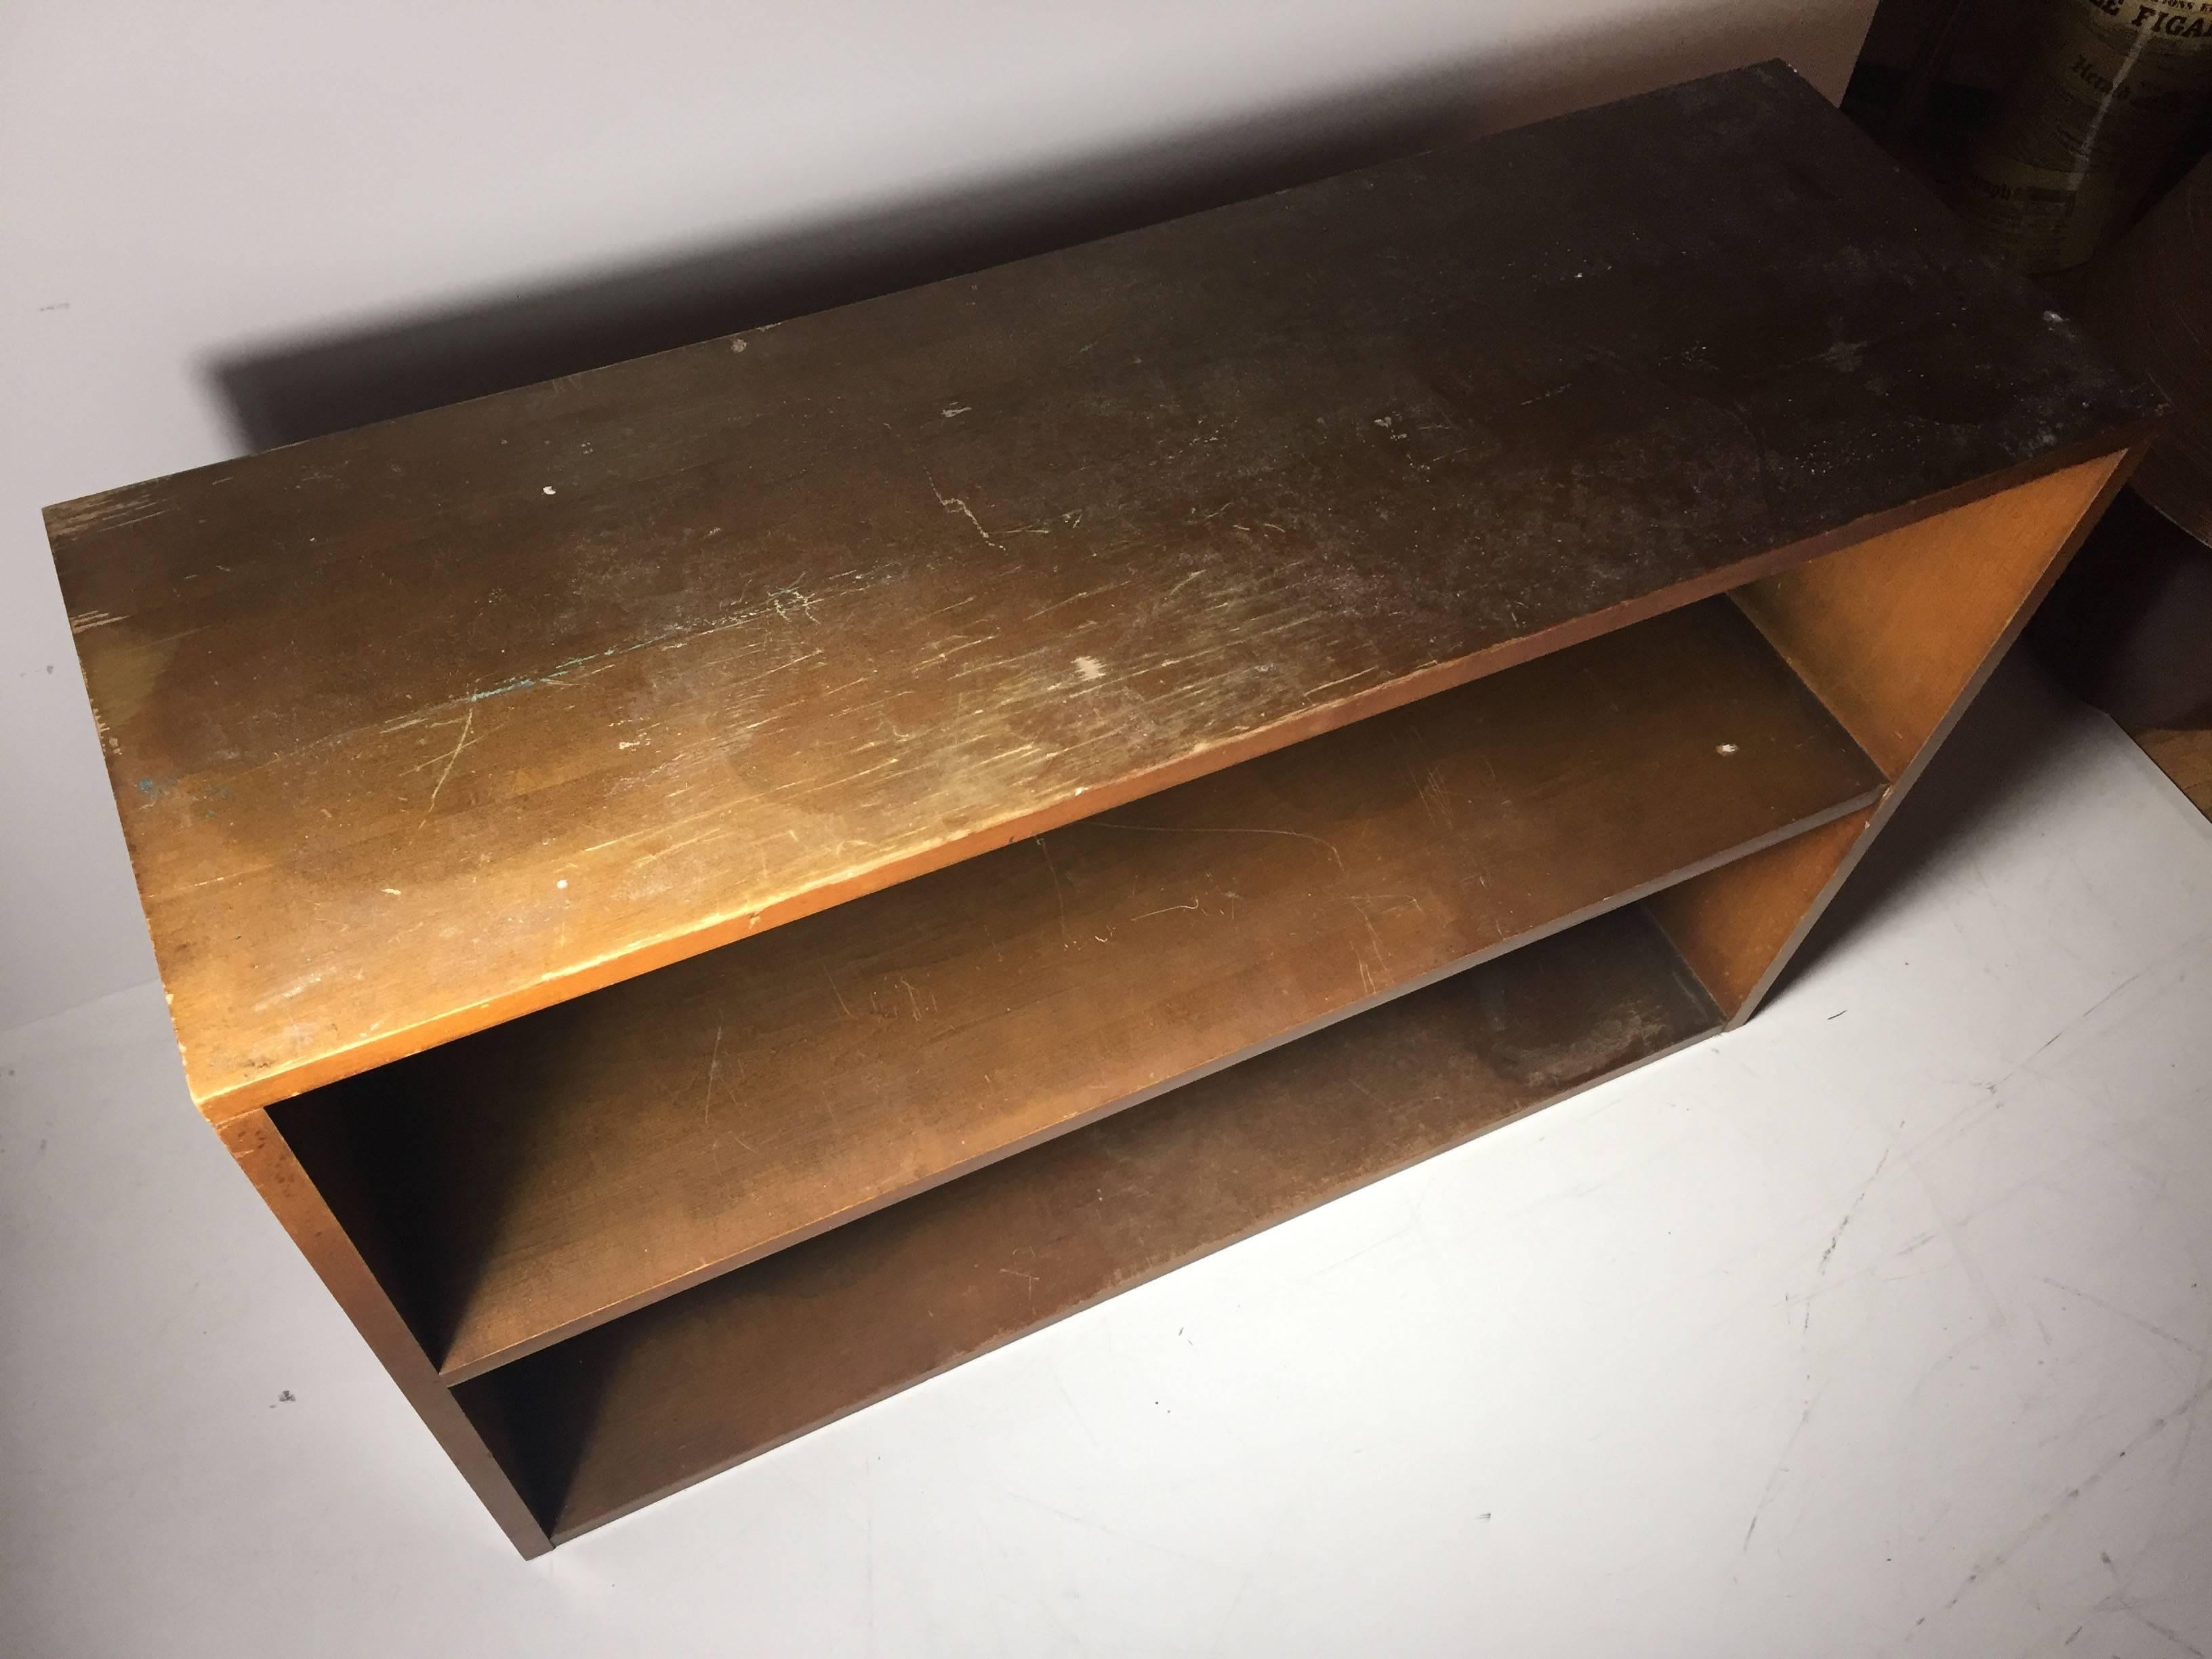 Planner group book shelf. Refinishing required. Perfect small companion piece for a Paul McCobb Platform bench.